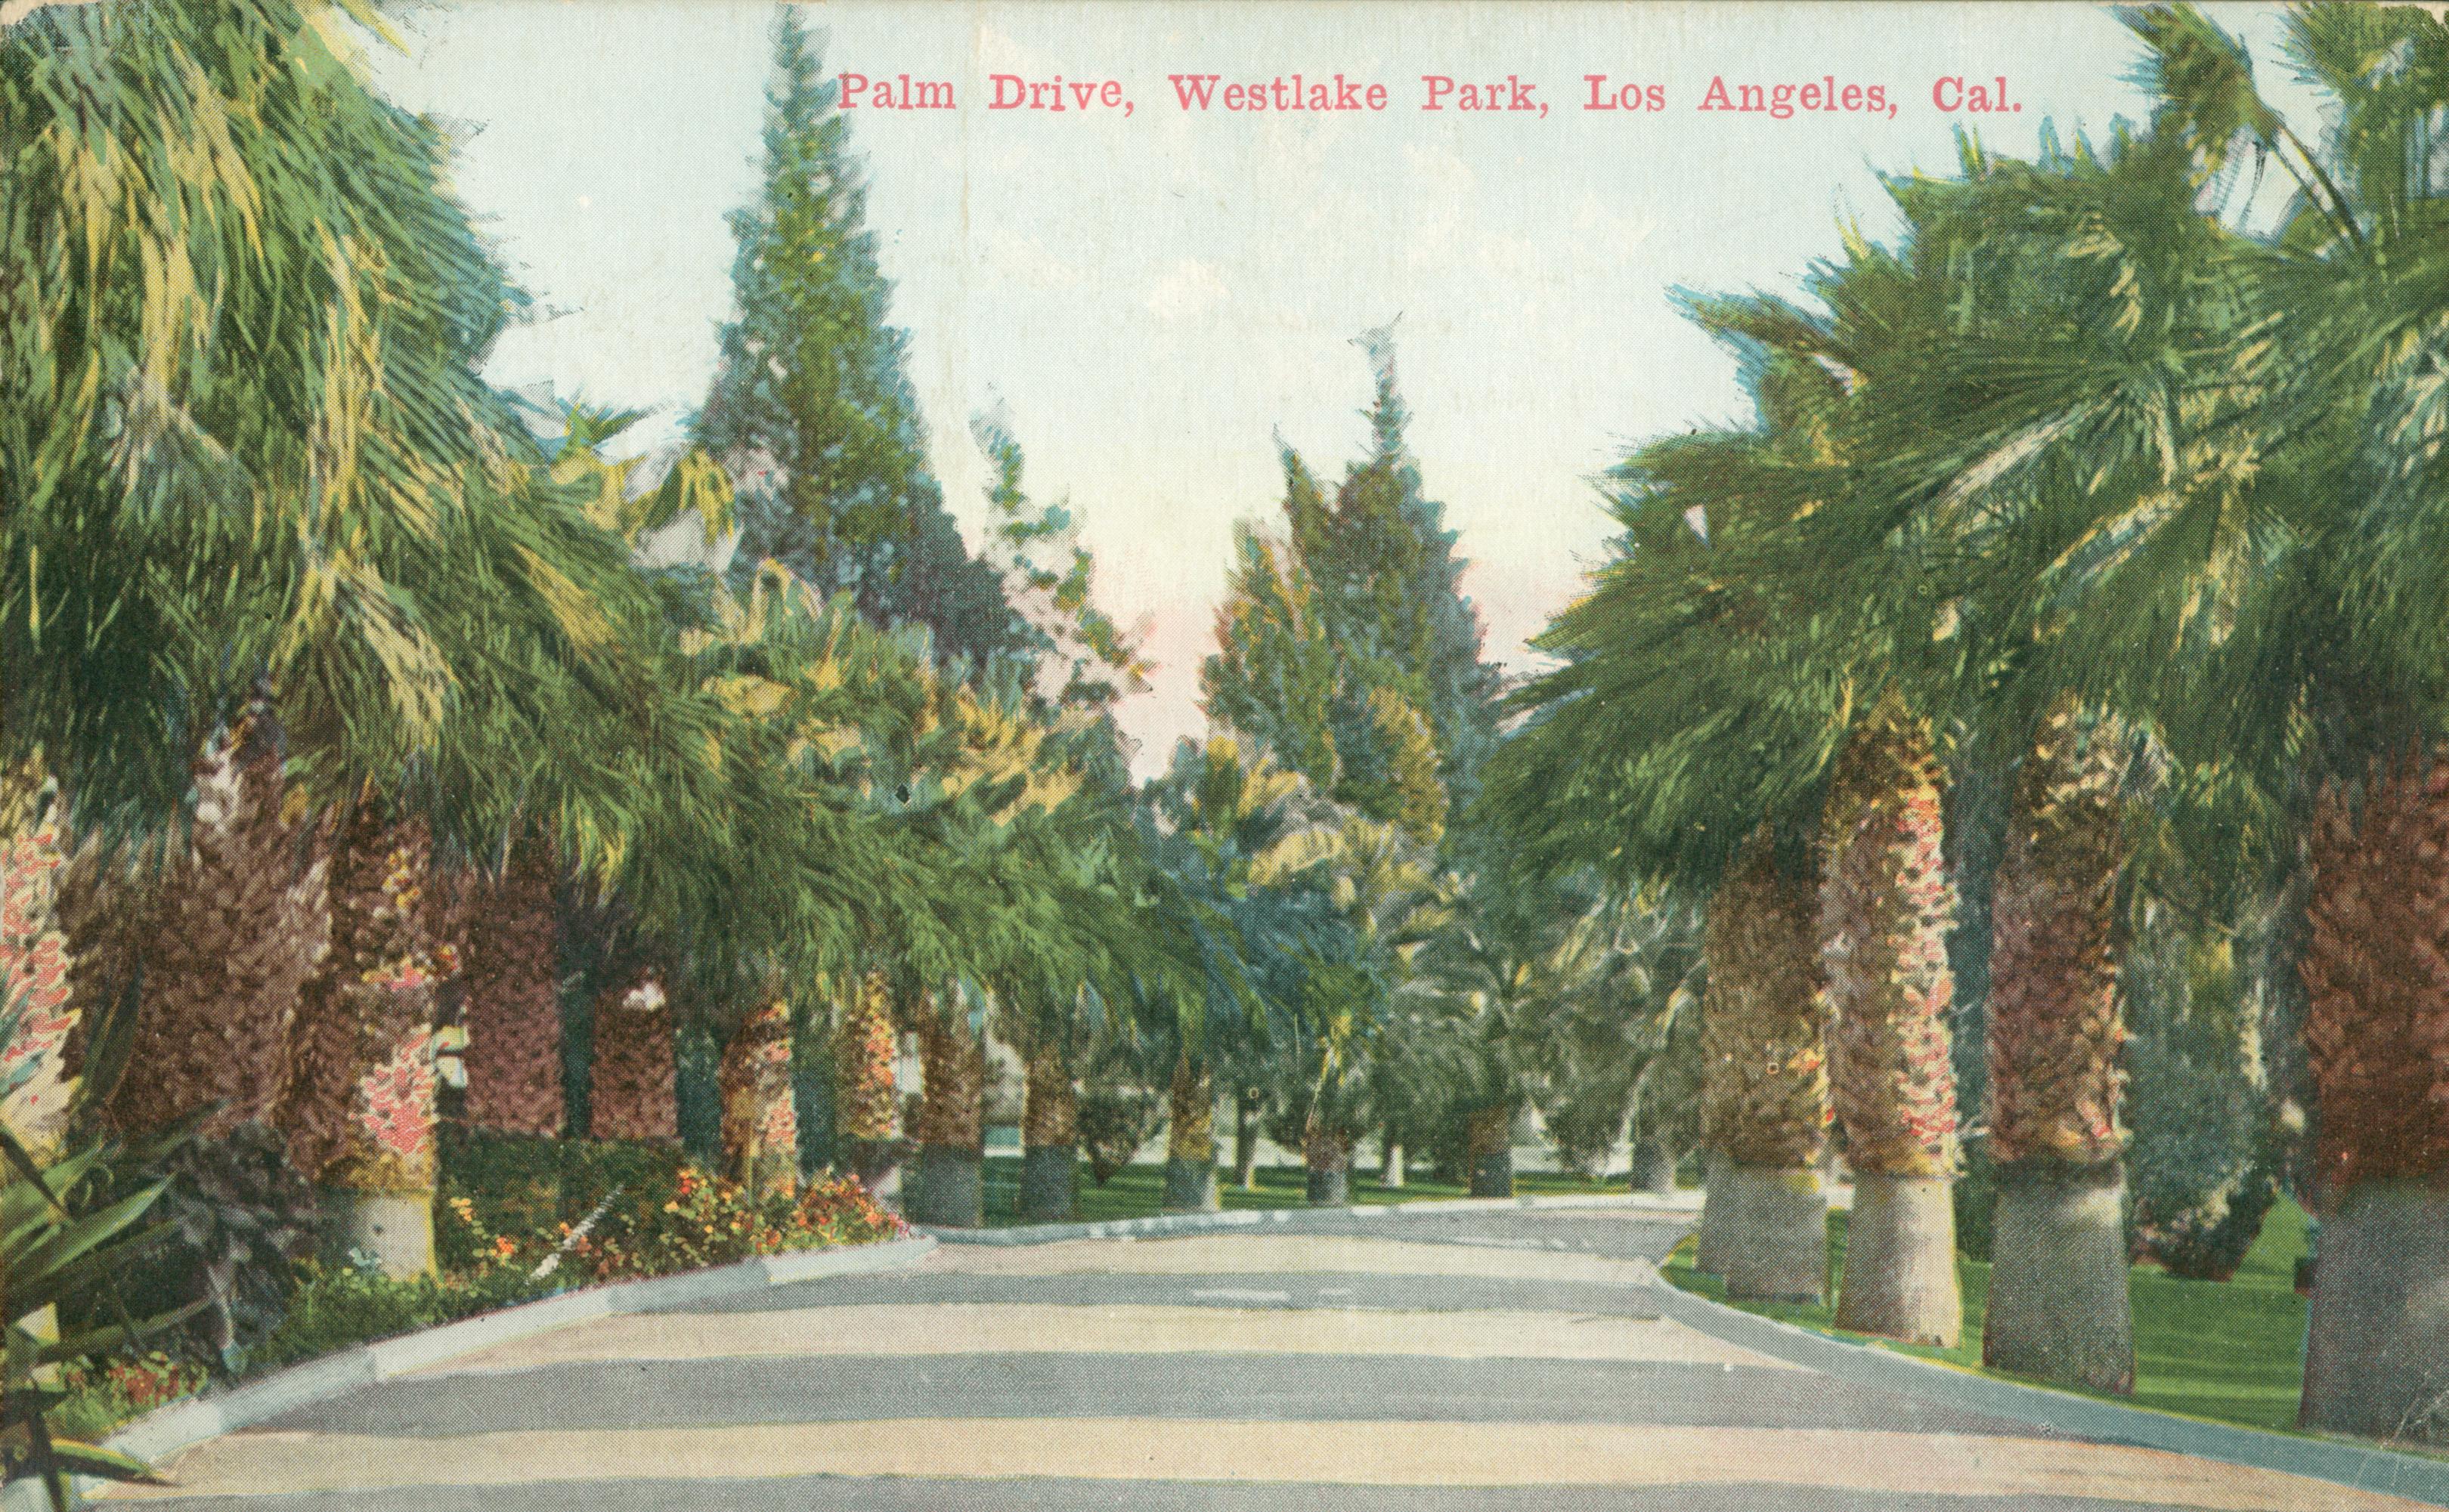 This postcard shows an street lined with palms and flowers